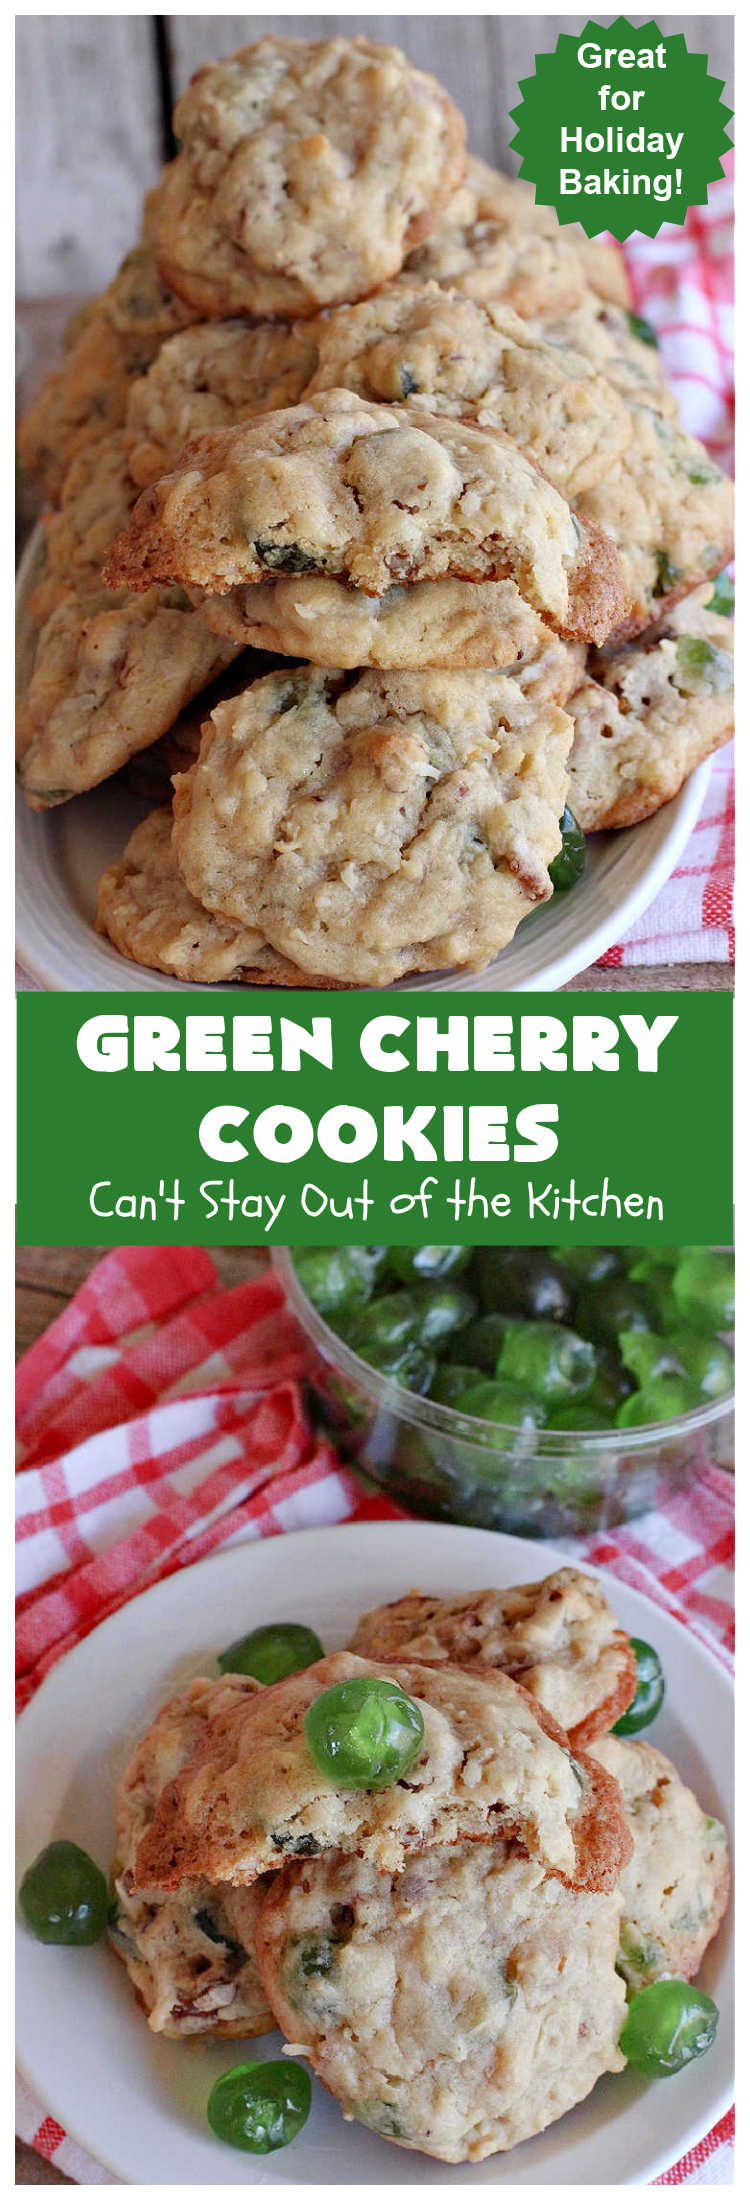 Green Cherry Cookies | Can't Stay Out of the Kitchen